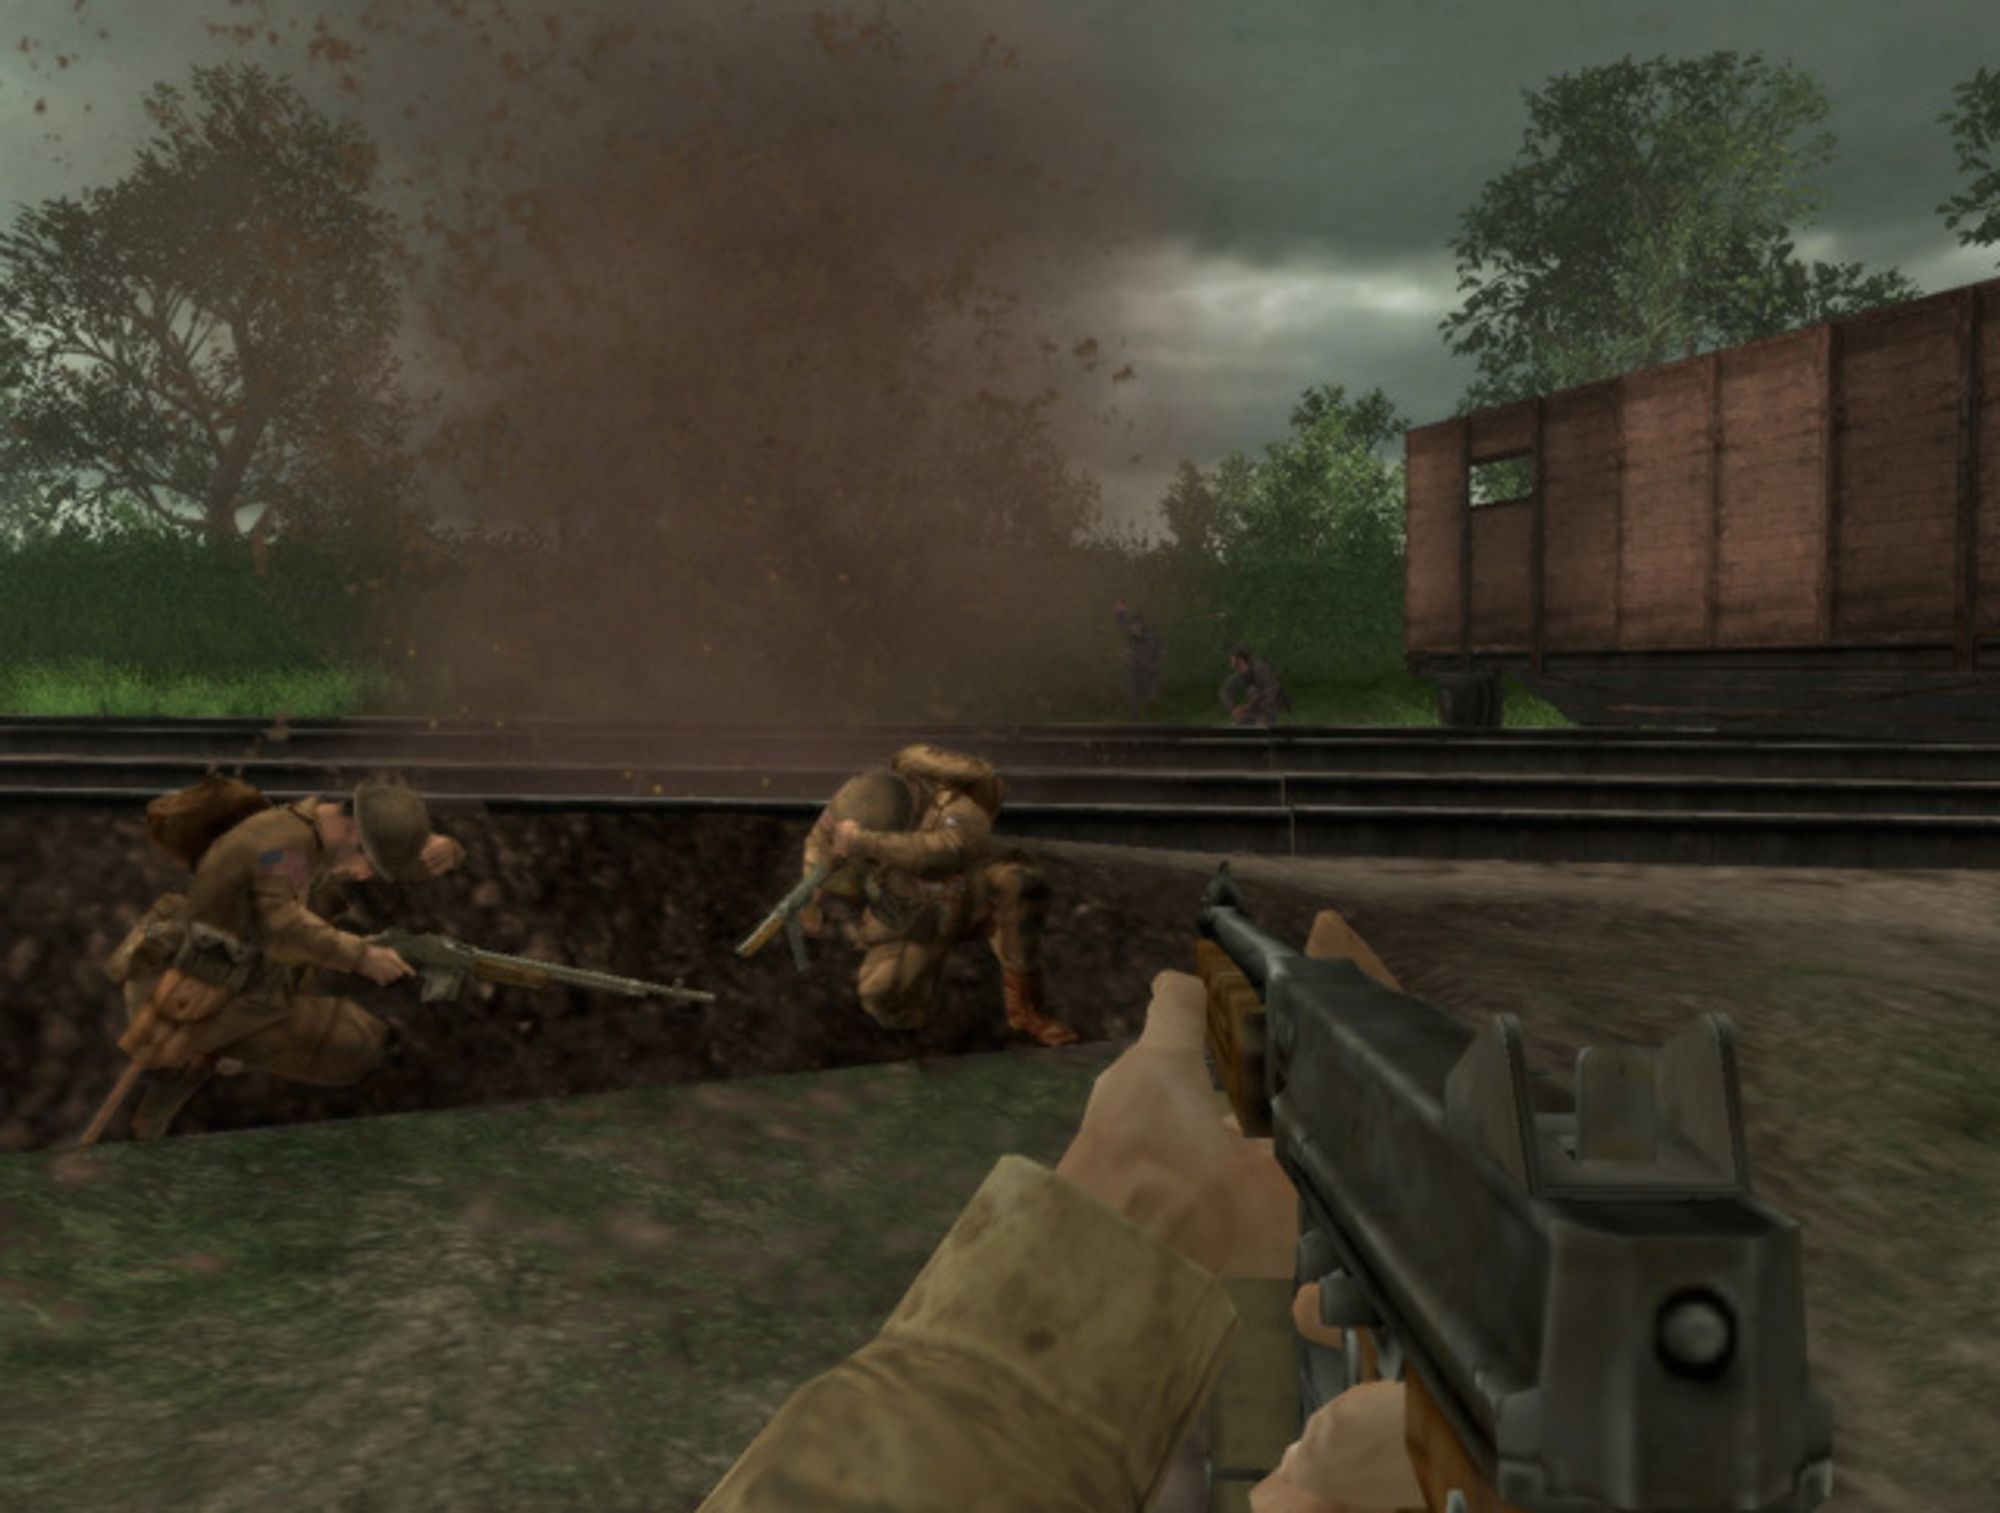 2 30 games. Brothers in Arms: Road to Hill 30. Brothers in Arms Road to Hill 30 screenshots. Brothers in Arms: Road to Hill 30 (бука). Brothers in Arms 2 Скриншоты.